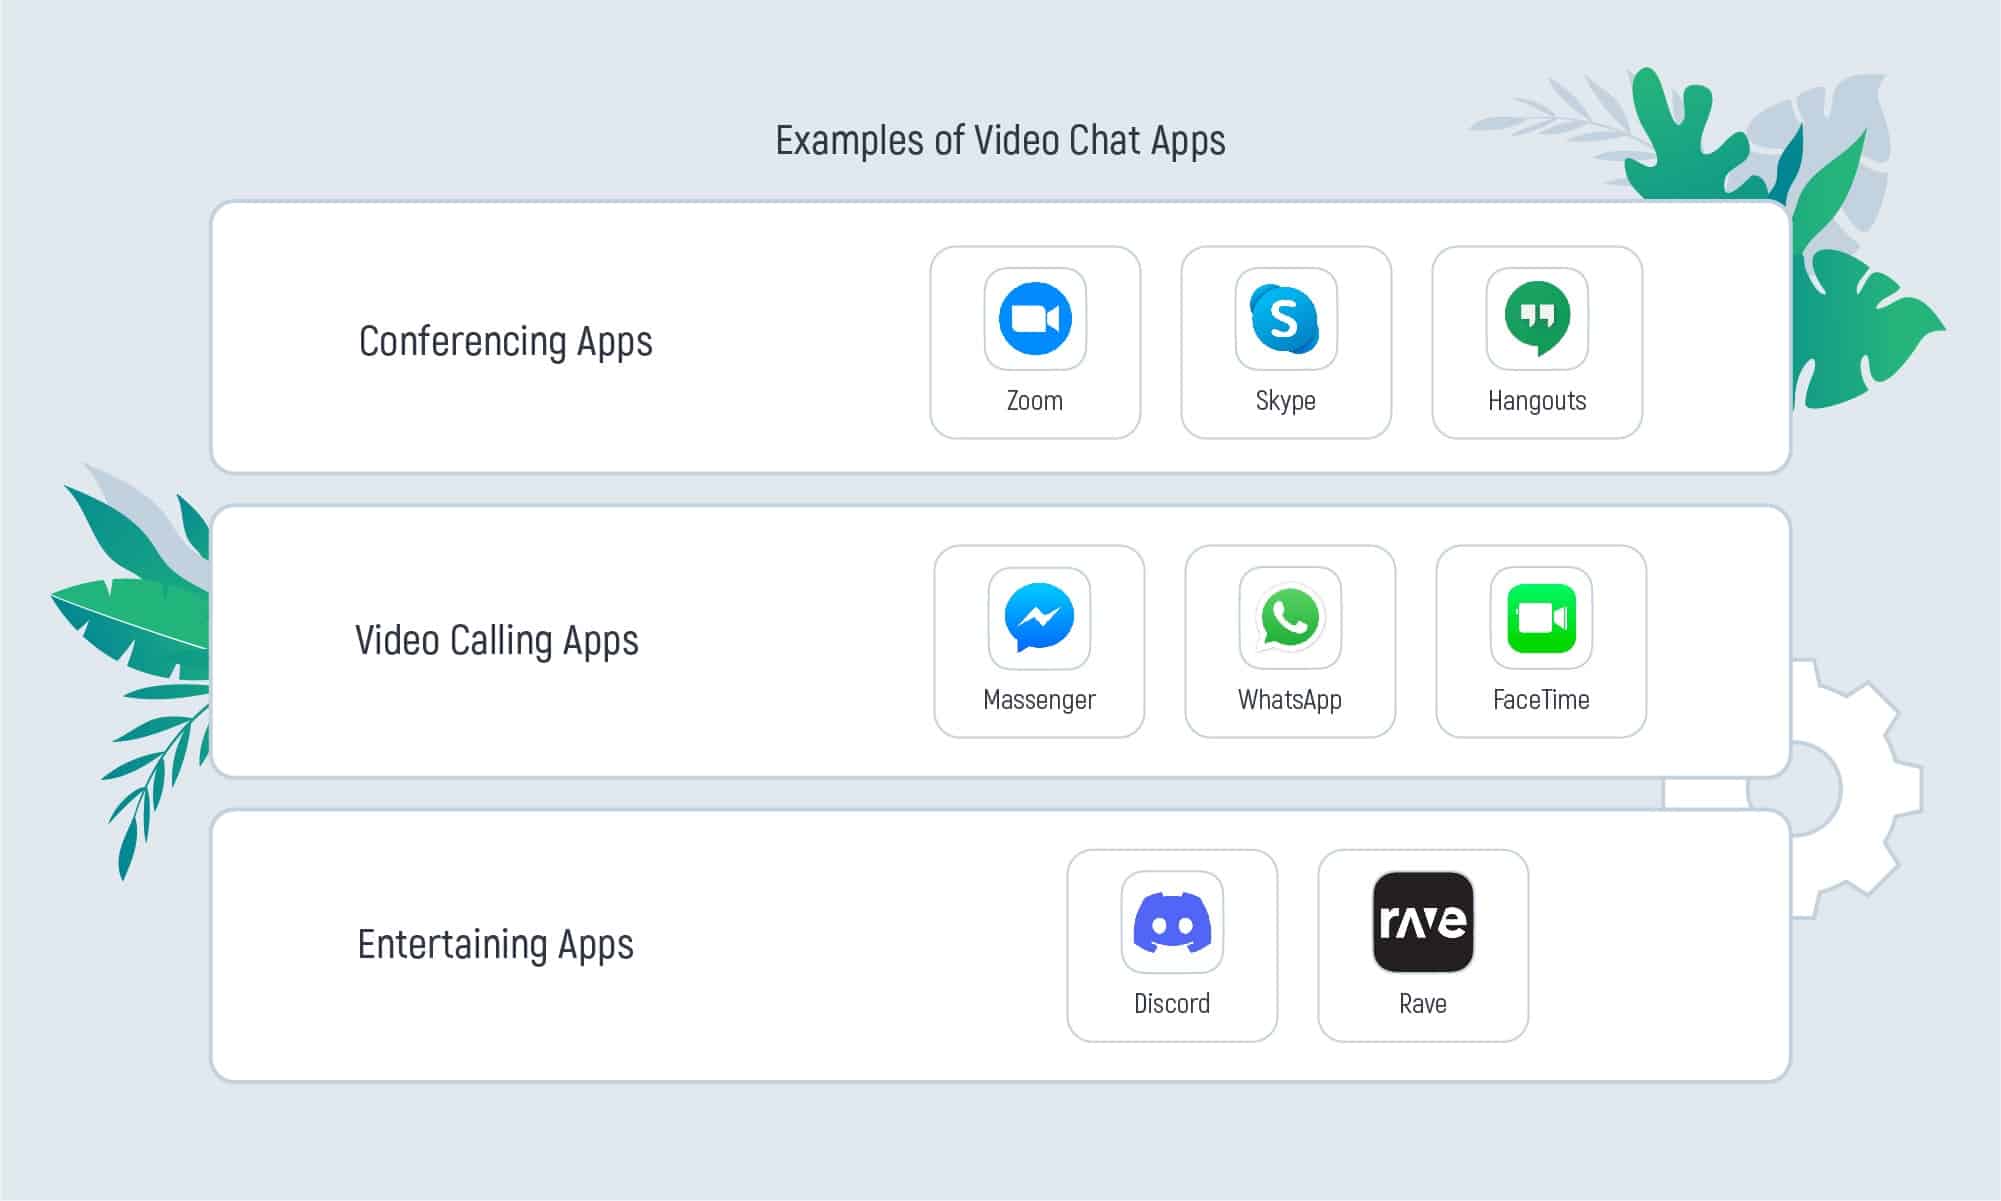 How to Make a Video Chat App: Steps and Features Overview